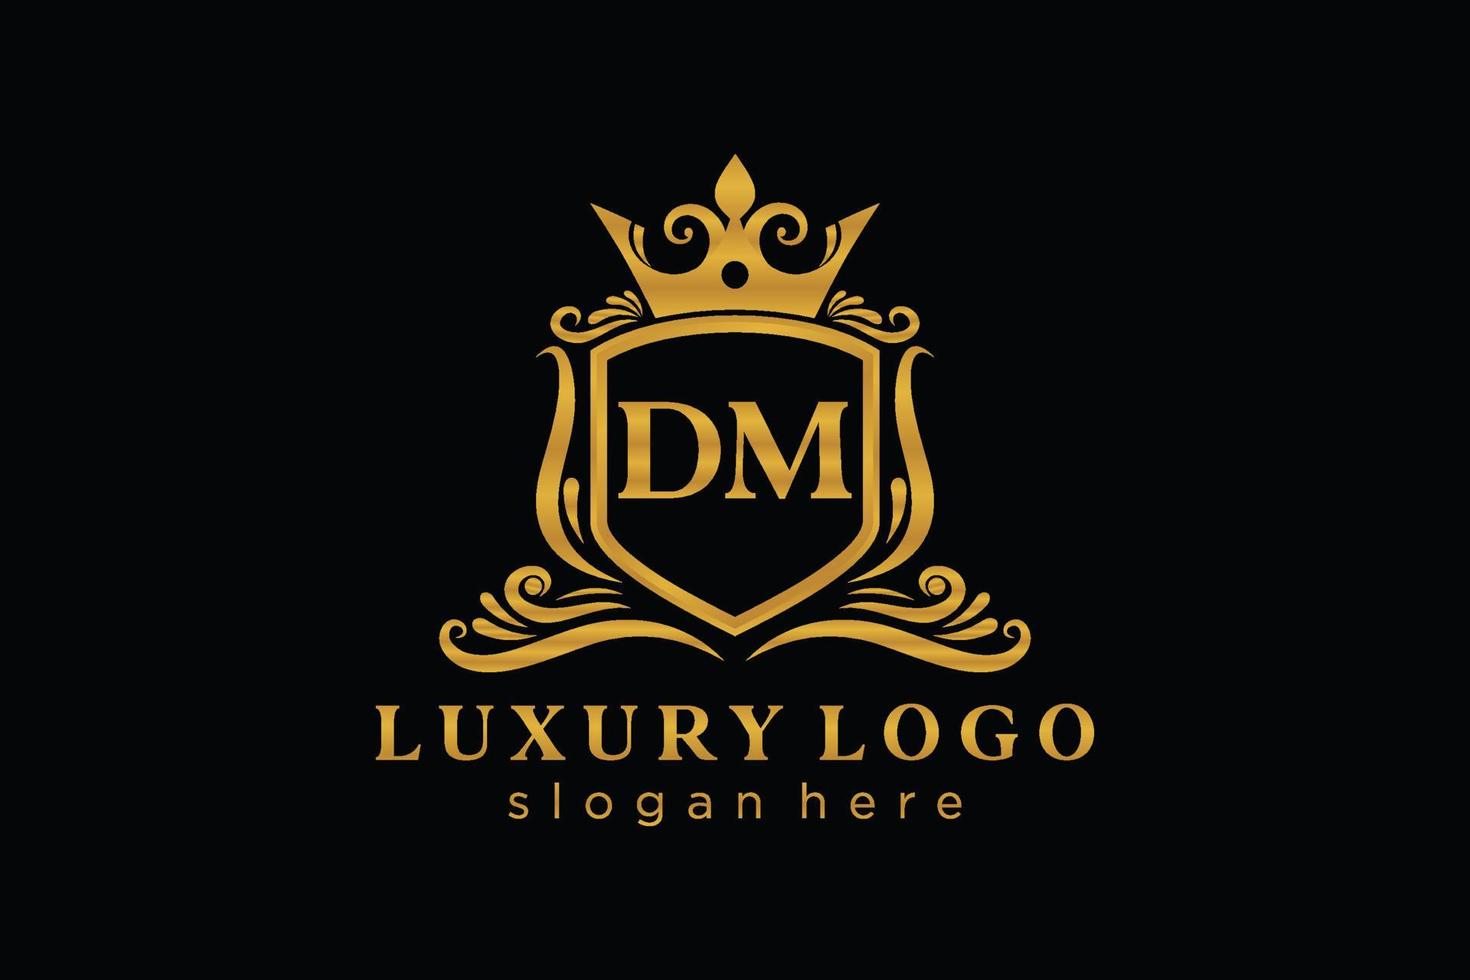 Initial DM Letter Royal Luxury Logo template in vector art for Restaurant, Royalty, Boutique, Cafe, Hotel, Heraldic, Jewelry, Fashion and other vector illustration.